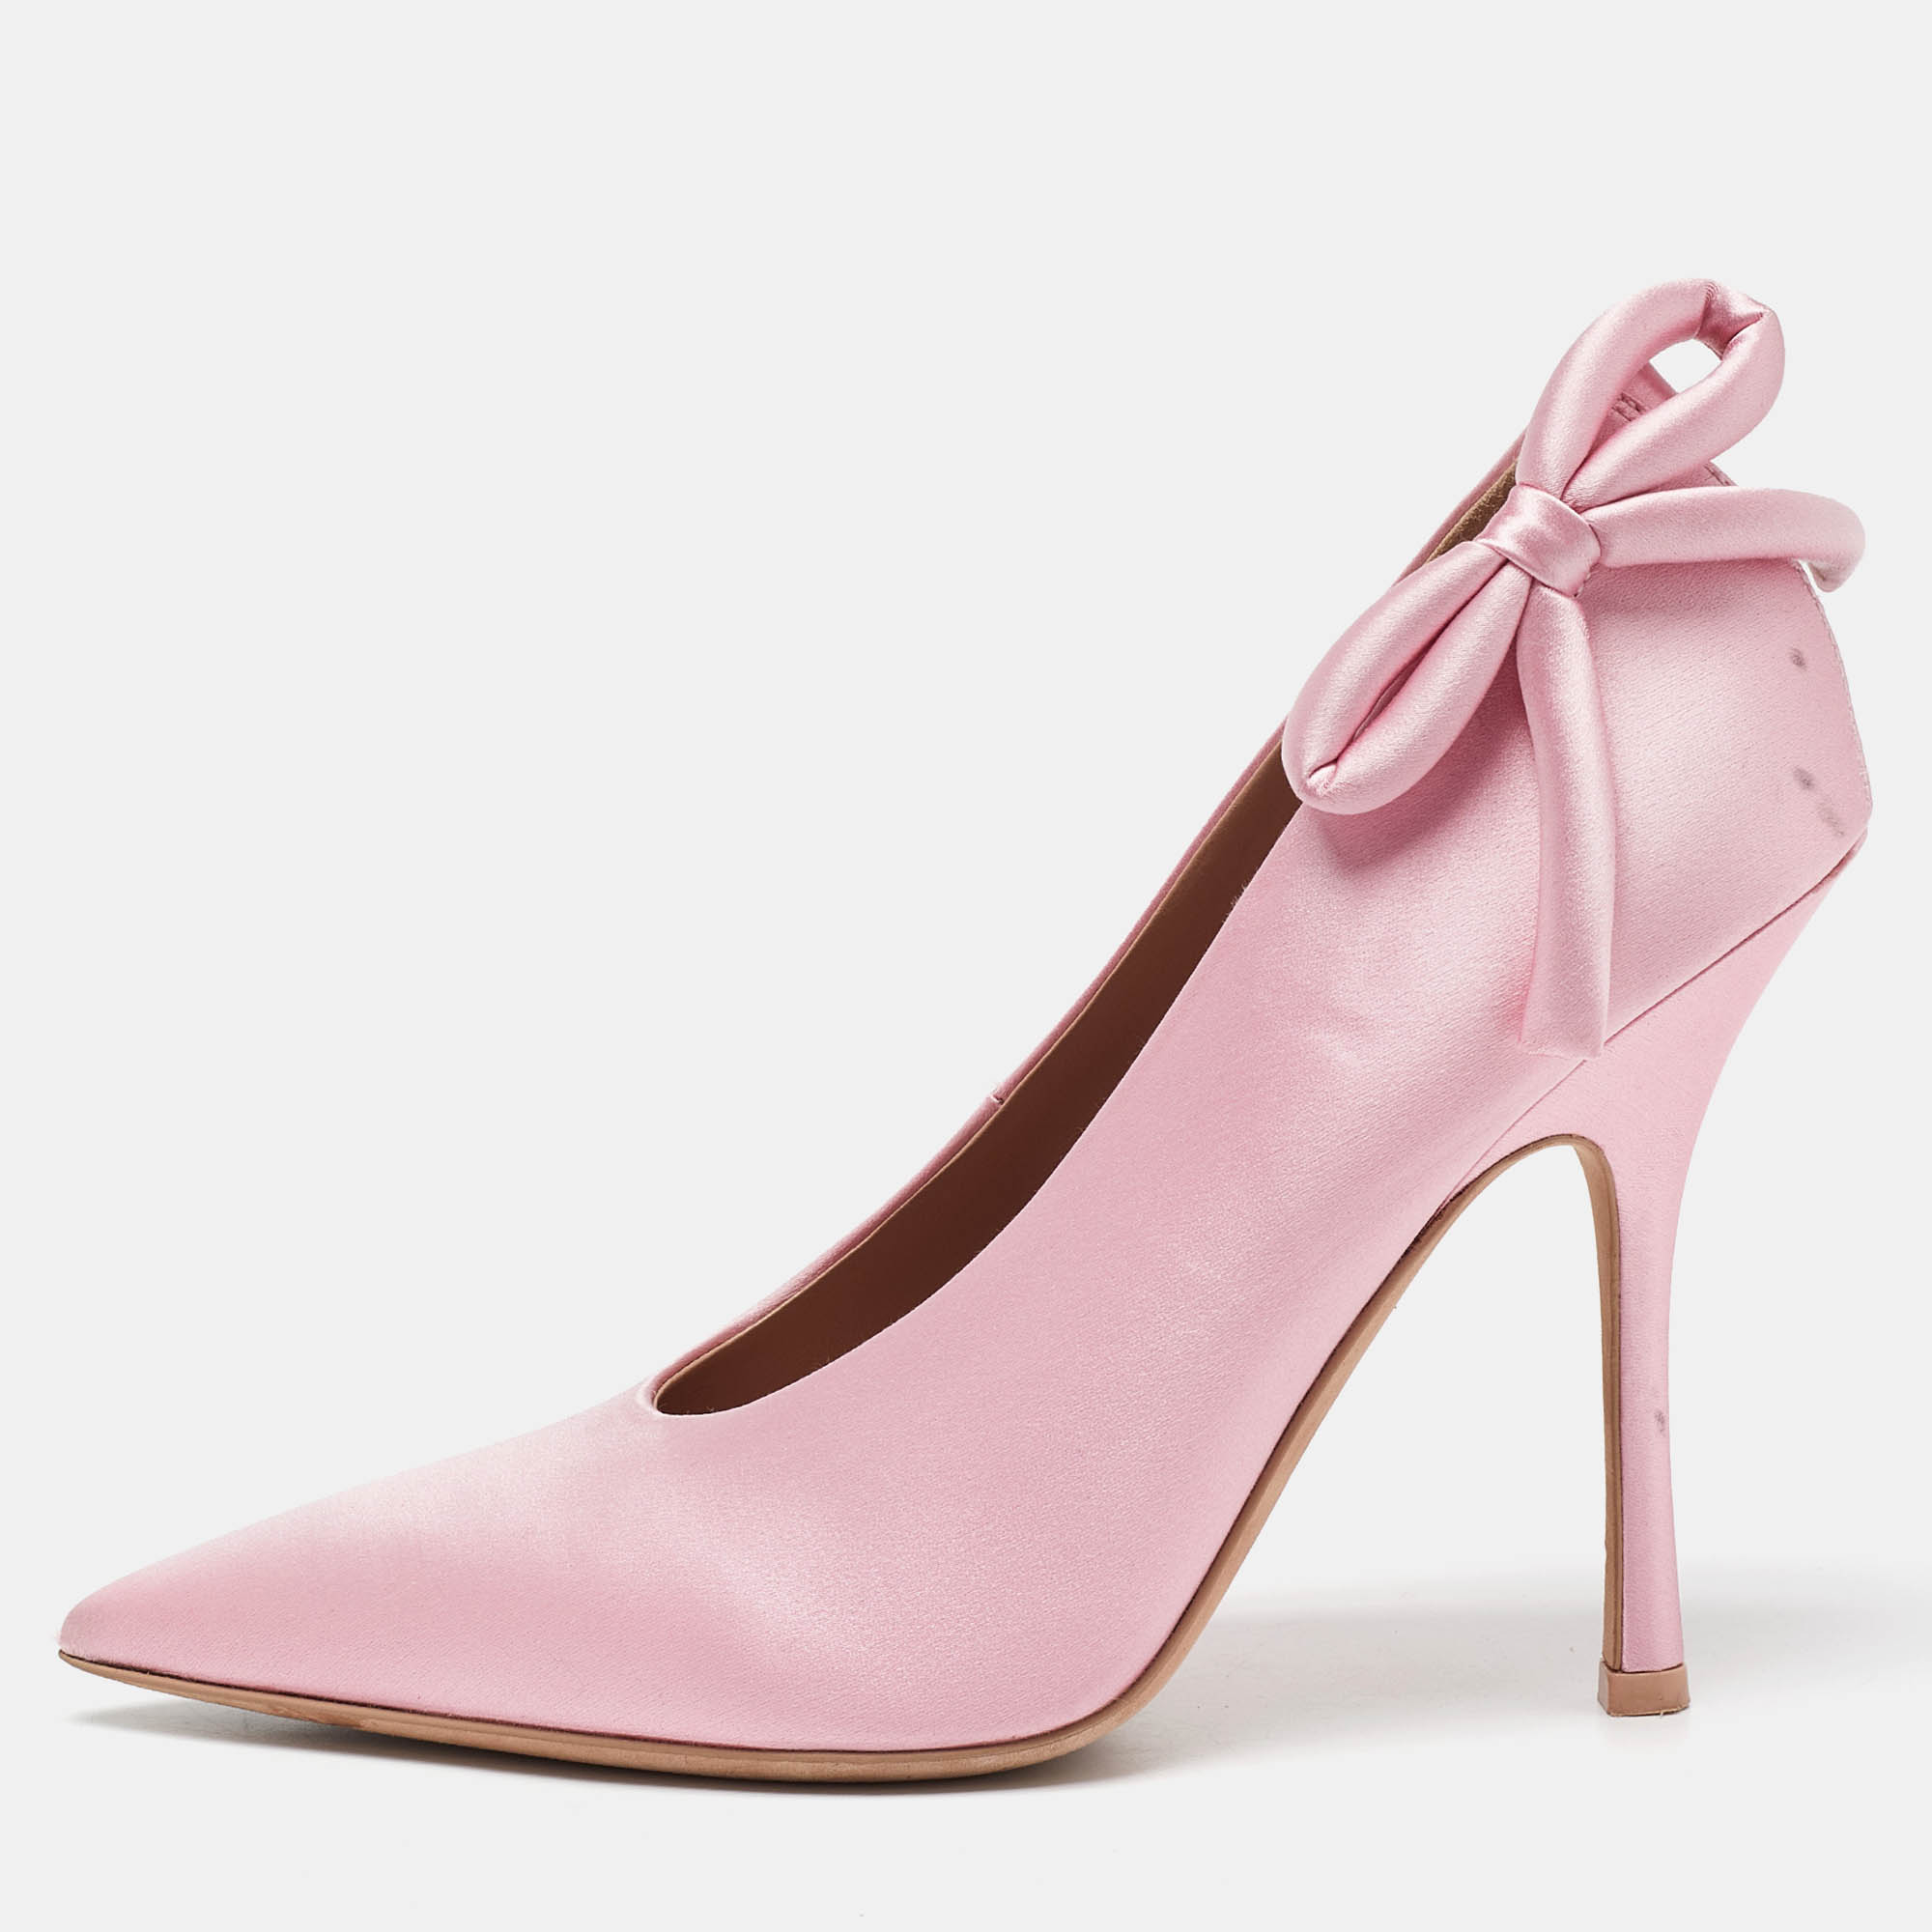 Valentino pink satin nite-out pointed toe pumps size 39